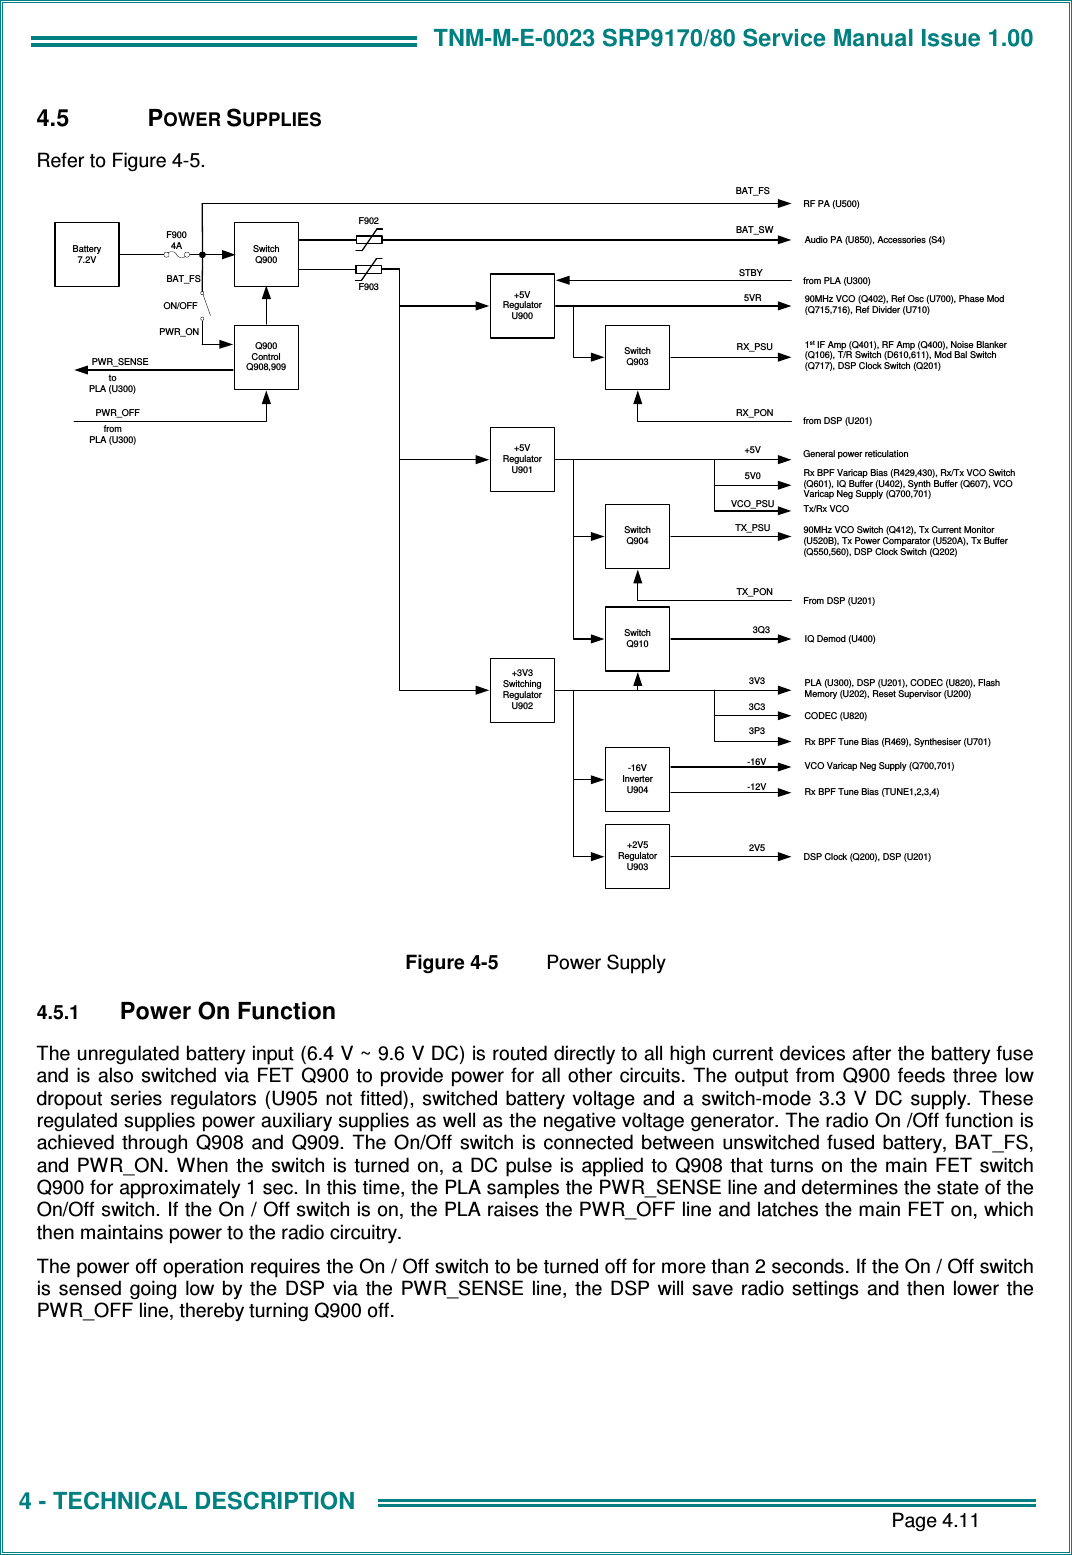 TNM-M-E-0023 SRP9170/80 Service Manual Issue 1.00       Page 4.11 4 - TECHNICAL DESCRIPTION 4.5  POWER SUPPLIES Refer to Figure 4-5. PWR_OFFQ900ControlQ908,909SwitchQ900ON/OFFfromPLA (U300)F9004ABattery7.2VtoPLA (U300)PWR_SENSEF902F903BAT_SWBAT_FSPWR_ONBAT_FSRF PA (U500)Audio PA (U850), Accessories (S4)+5VRegulatorU9005VRSwitchQ903RX_PSURX_PON from DSP (U201)+5VRegulatorU901STBY from PLA (U300)+5V5V0VCO_PSUSwitchQ9103Q3+3V3SwitchingRegulatorU9023V33C33P3-16VInverterU904-16V-12V+2V5RegulatorU9032V5SwitchQ904TX_PONTX_PSUFrom DSP (U201)90MHz VCO (Q402), Ref Osc (U700), Phase Mod(Q715,716), Ref Divider (U710)1st IF Amp (Q401), RF Amp (Q400), Noise Blanker(Q106), T/R Switch (D610,611), Mod Bal Switch(Q717), DSP Clock Switch (Q201)Rx BPF Varicap Bias (R429,430), Rx/Tx VCO Switch(Q601), IQ Buffer (U402), Synth Buffer (Q607), VCOVaricap Neg Supply (Q700,701)Tx/Rx VCO90MHz VCO Switch (Q412), Tx Current Monitor(U520B), Tx Power Comparator (U520A), Tx Buffer(Q550,560), DSP Clock Switch (Q202)IQ Demod (U400)PLA (U300), DSP (U201), CODEC (U820), FlashMemory (U202), Reset Supervisor (U200)CODEC (U820)Rx BPF Tune Bias (R469), Synthesiser (U701)VCO Varicap Neg Supply (Q700,701)Rx BPF Tune Bias (TUNE1,2,3,4)DSP Clock (Q200), DSP (U201)General power reticulation  Figure 4-5  Power Supply 4.5.1 Power On Function The unregulated battery input (6.4 V ~ 9.6 V DC) is routed directly to all high current devices after the battery fuse and is also switched via FET  Q900 to provide power for all other circuits.  The output from Q900 feeds three  low dropout series regulators  (U905  not  fitted),  switched battery voltage  and a  switch-mode  3.3 V  DC supply.  These regulated supplies power auxiliary supplies as well as the negative voltage generator. The radio On /Off function is achieved through  Q908 and  Q909. The  On/Off  switch  is connected between unswitched fused battery, BAT_FS, and PWR_ON.  When  the  switch is turned on, a DC  pulse  is applied to  Q908 that turns on the main FET  switch Q900 for approximately 1 sec. In this time, the PLA samples the PWR_SENSE line and determines the state of the On/Off switch. If the On / Off switch is on, the PLA raises the PWR_OFF line and latches the main FET on, which then maintains power to the radio circuitry. The power off operation requires the On / Off switch to be turned off for more than 2 seconds. If the On / Off switch is  sensed  going  low  by  the  DSP  via  the  PWR_SENSE  line, the  DSP will save  radio  settings  and  then lower the PWR_OFF line, thereby turning Q900 off.  